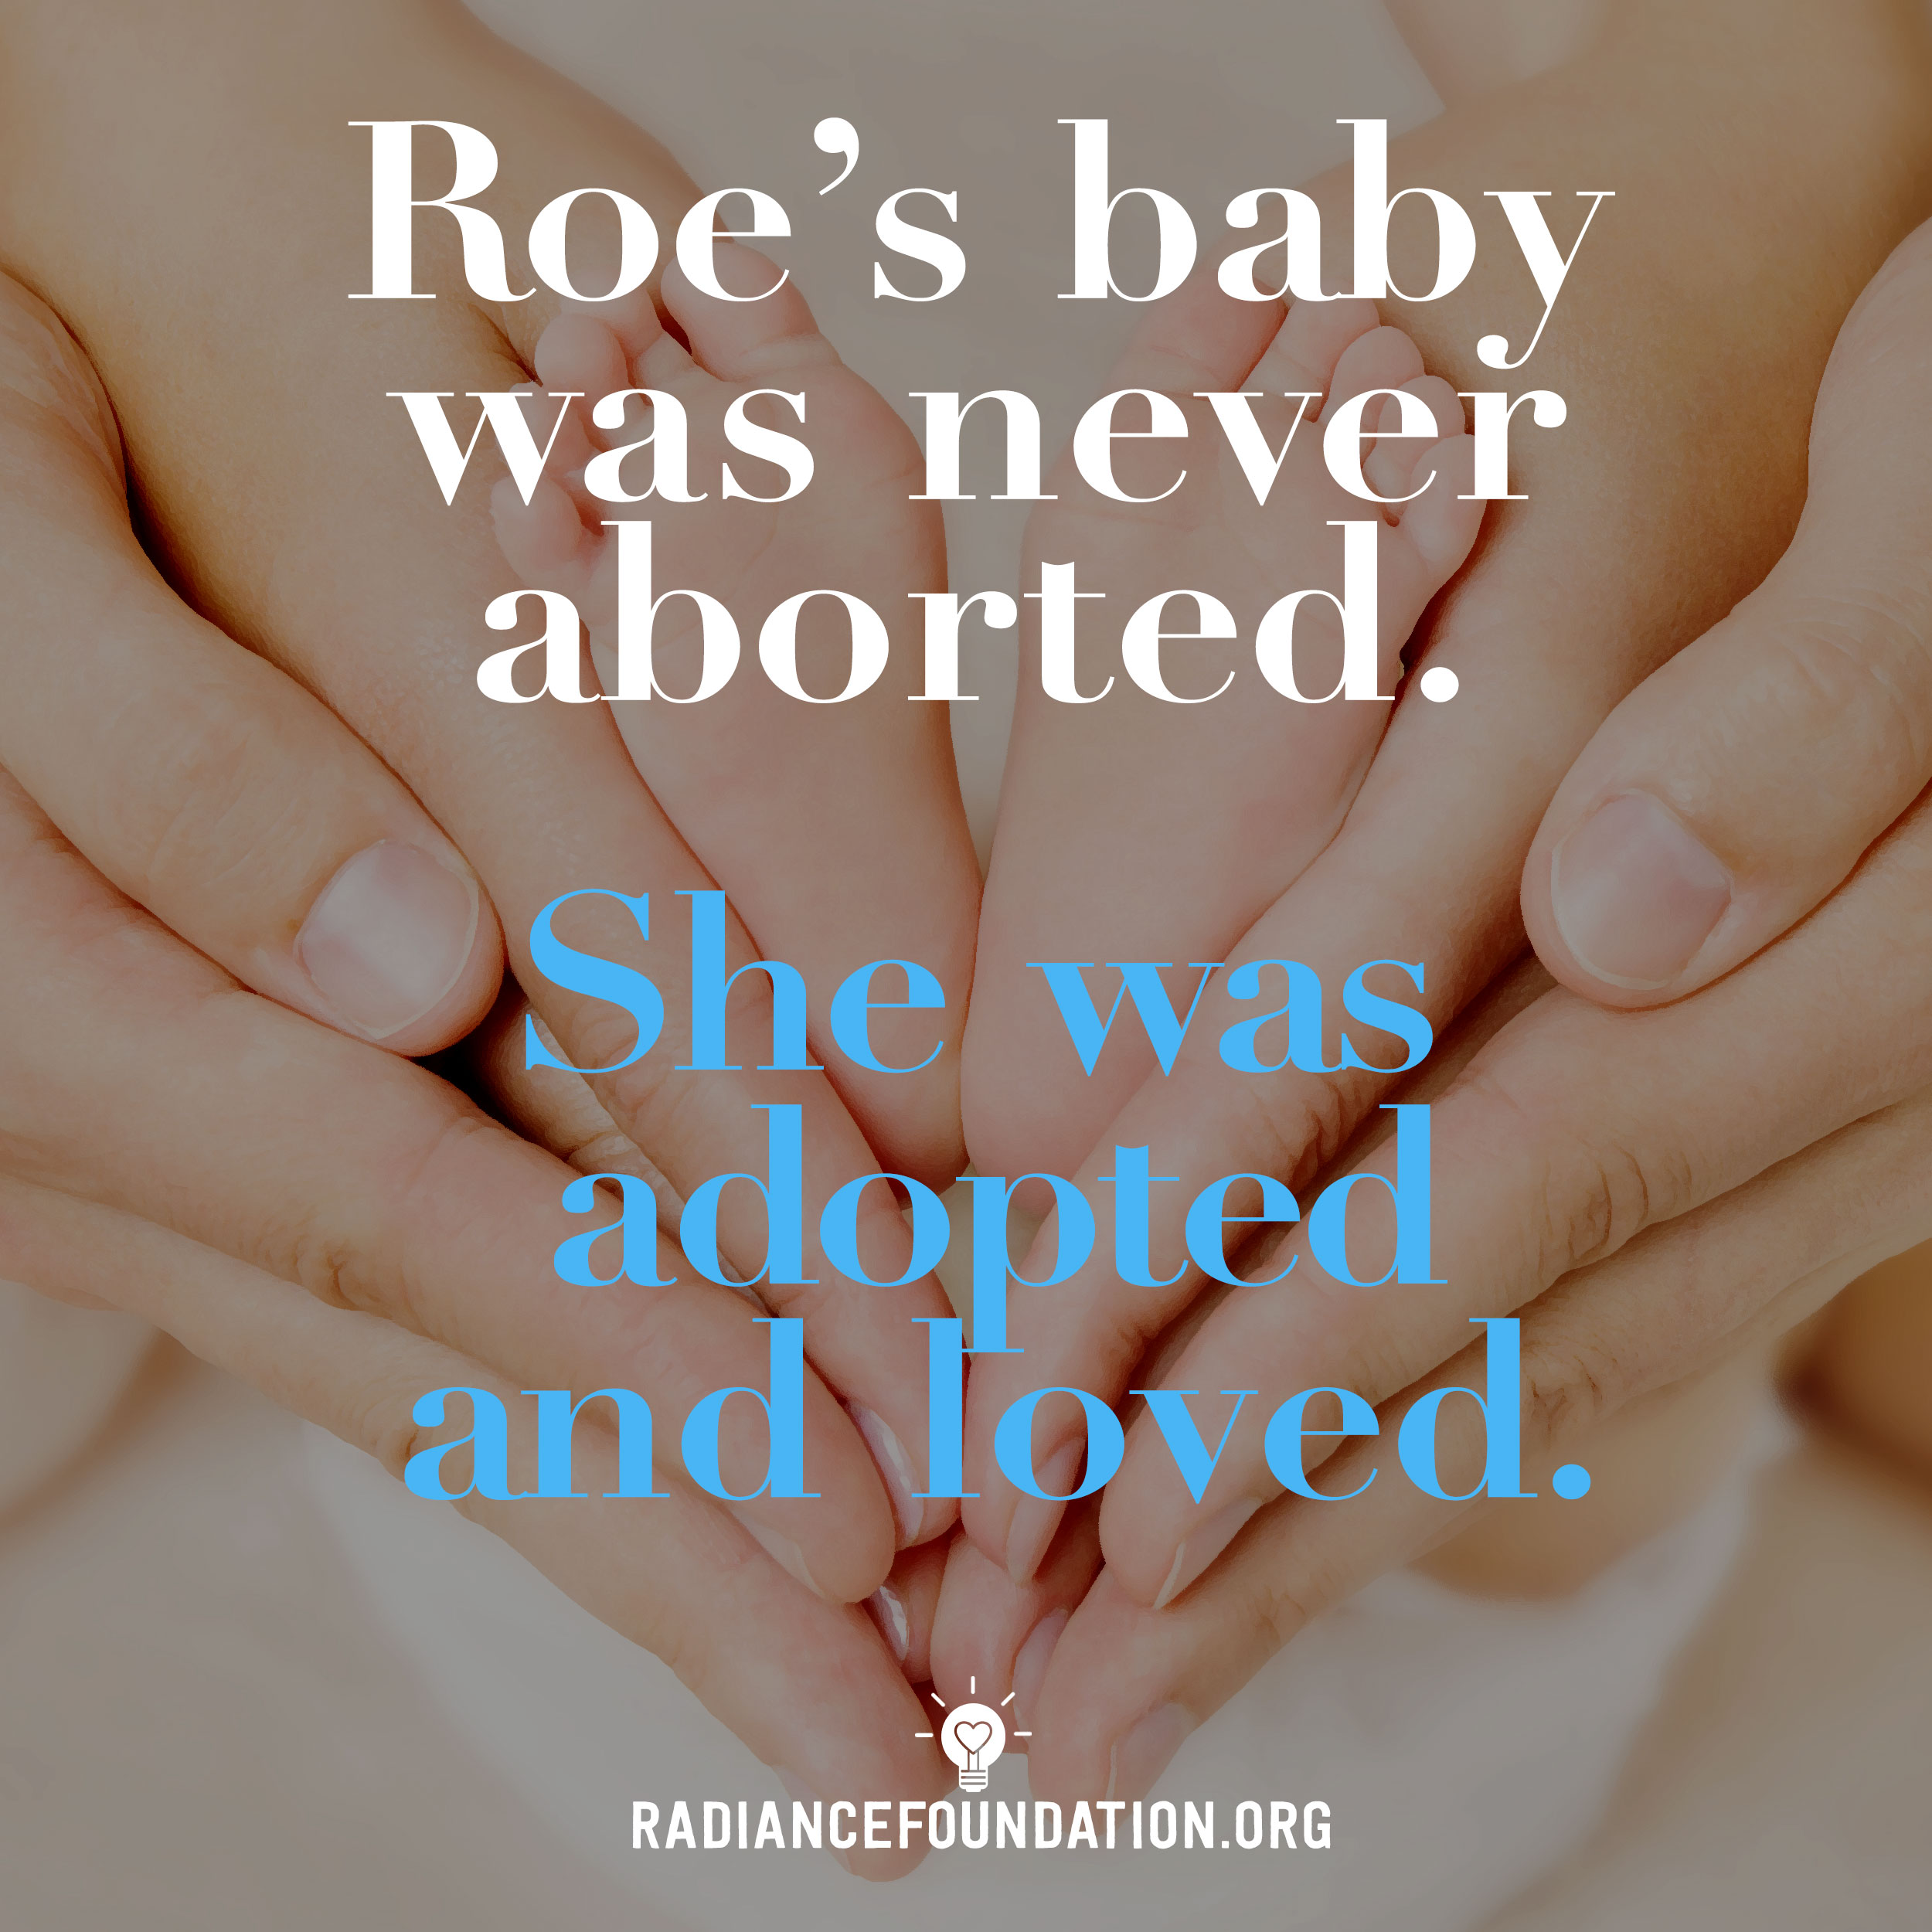 The truth about the baby behind Roe v. Wade